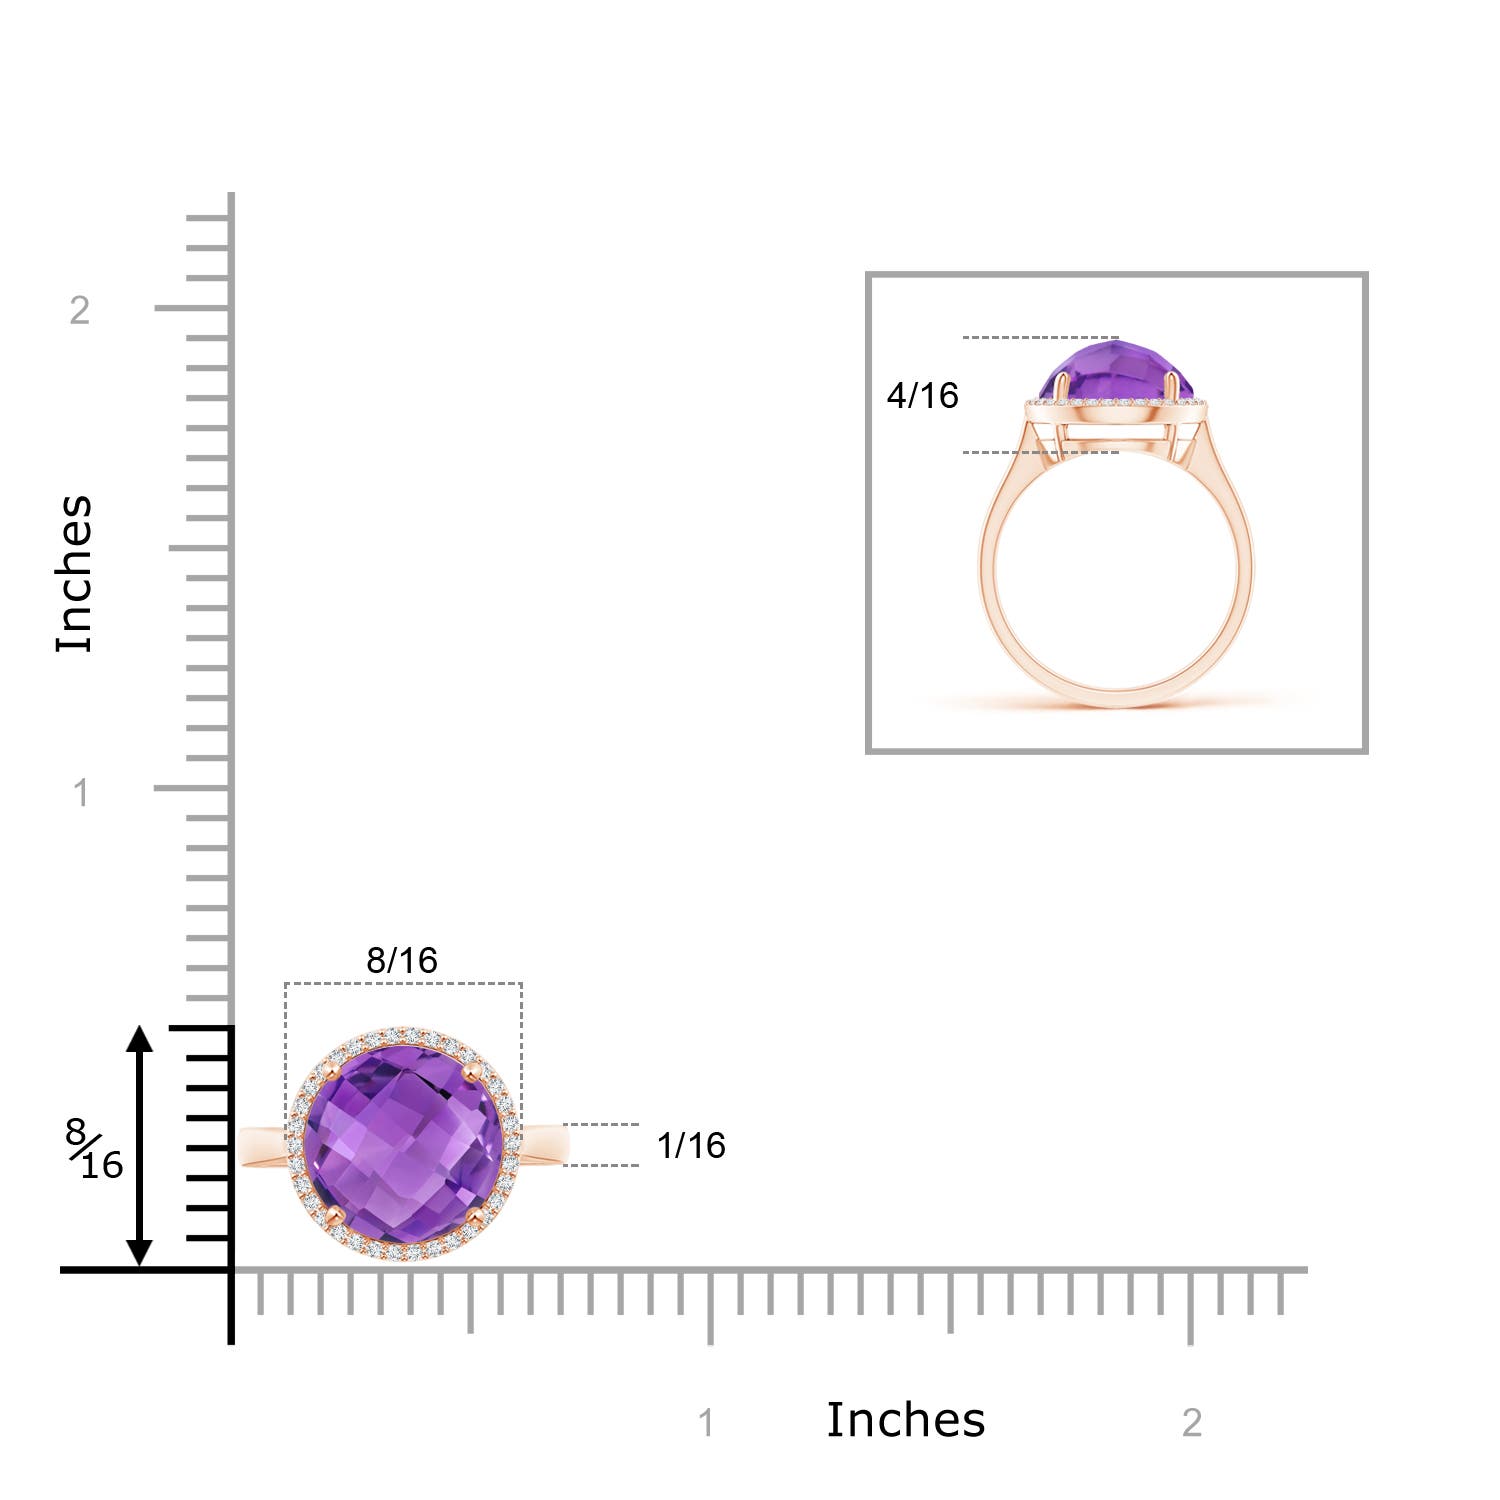 AA - Amethyst / 3.77 CT / 14 KT Rose Gold